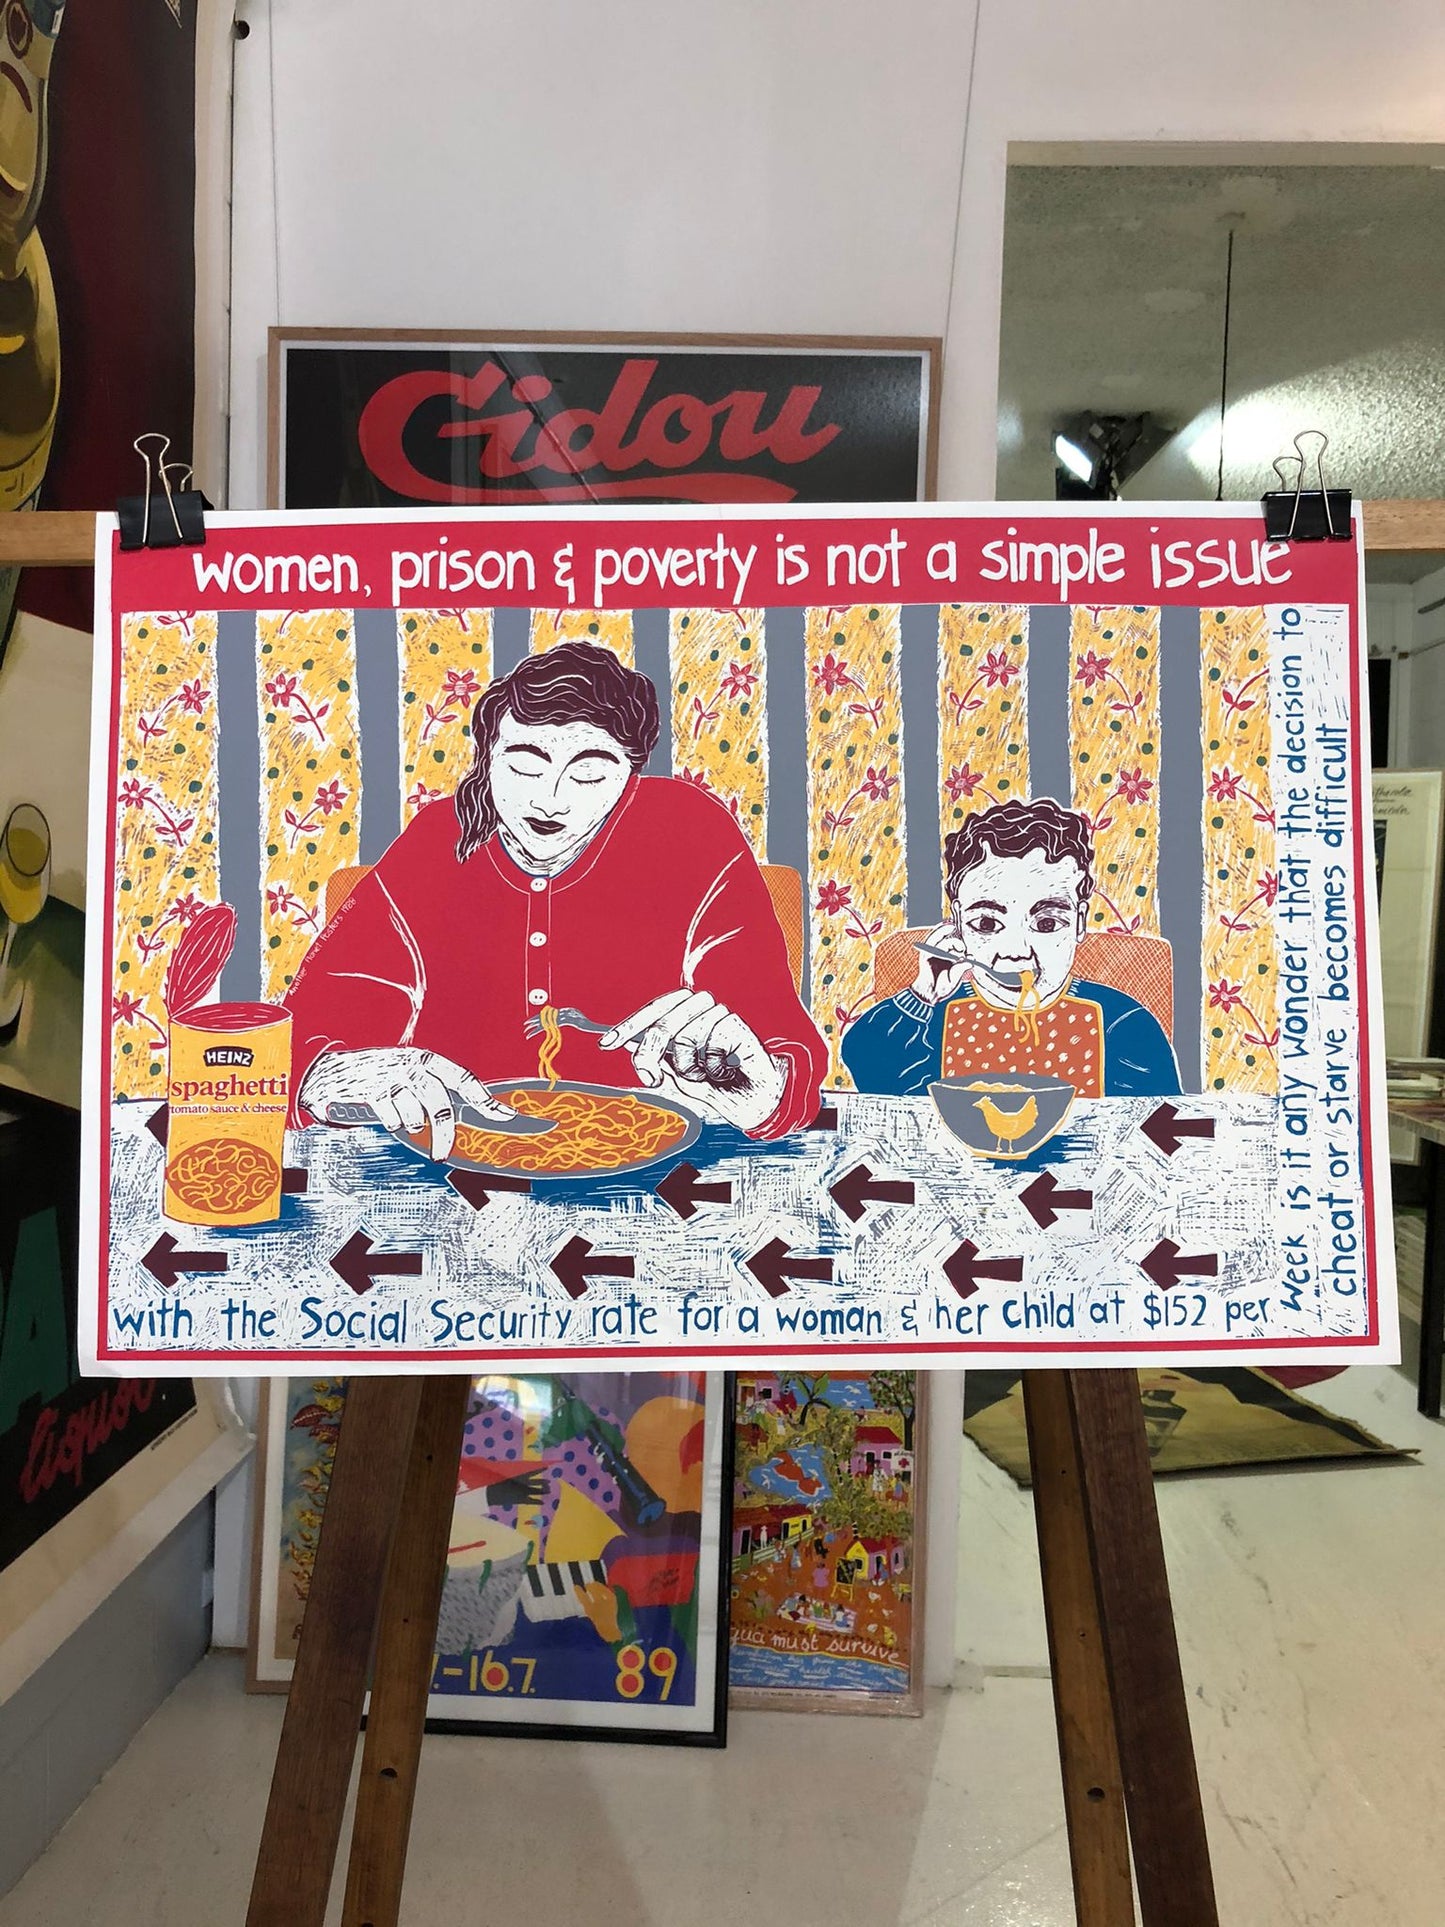 "Women, Prison & Poverty is not a Simple Issue" Activist Poster by Carole Wilson